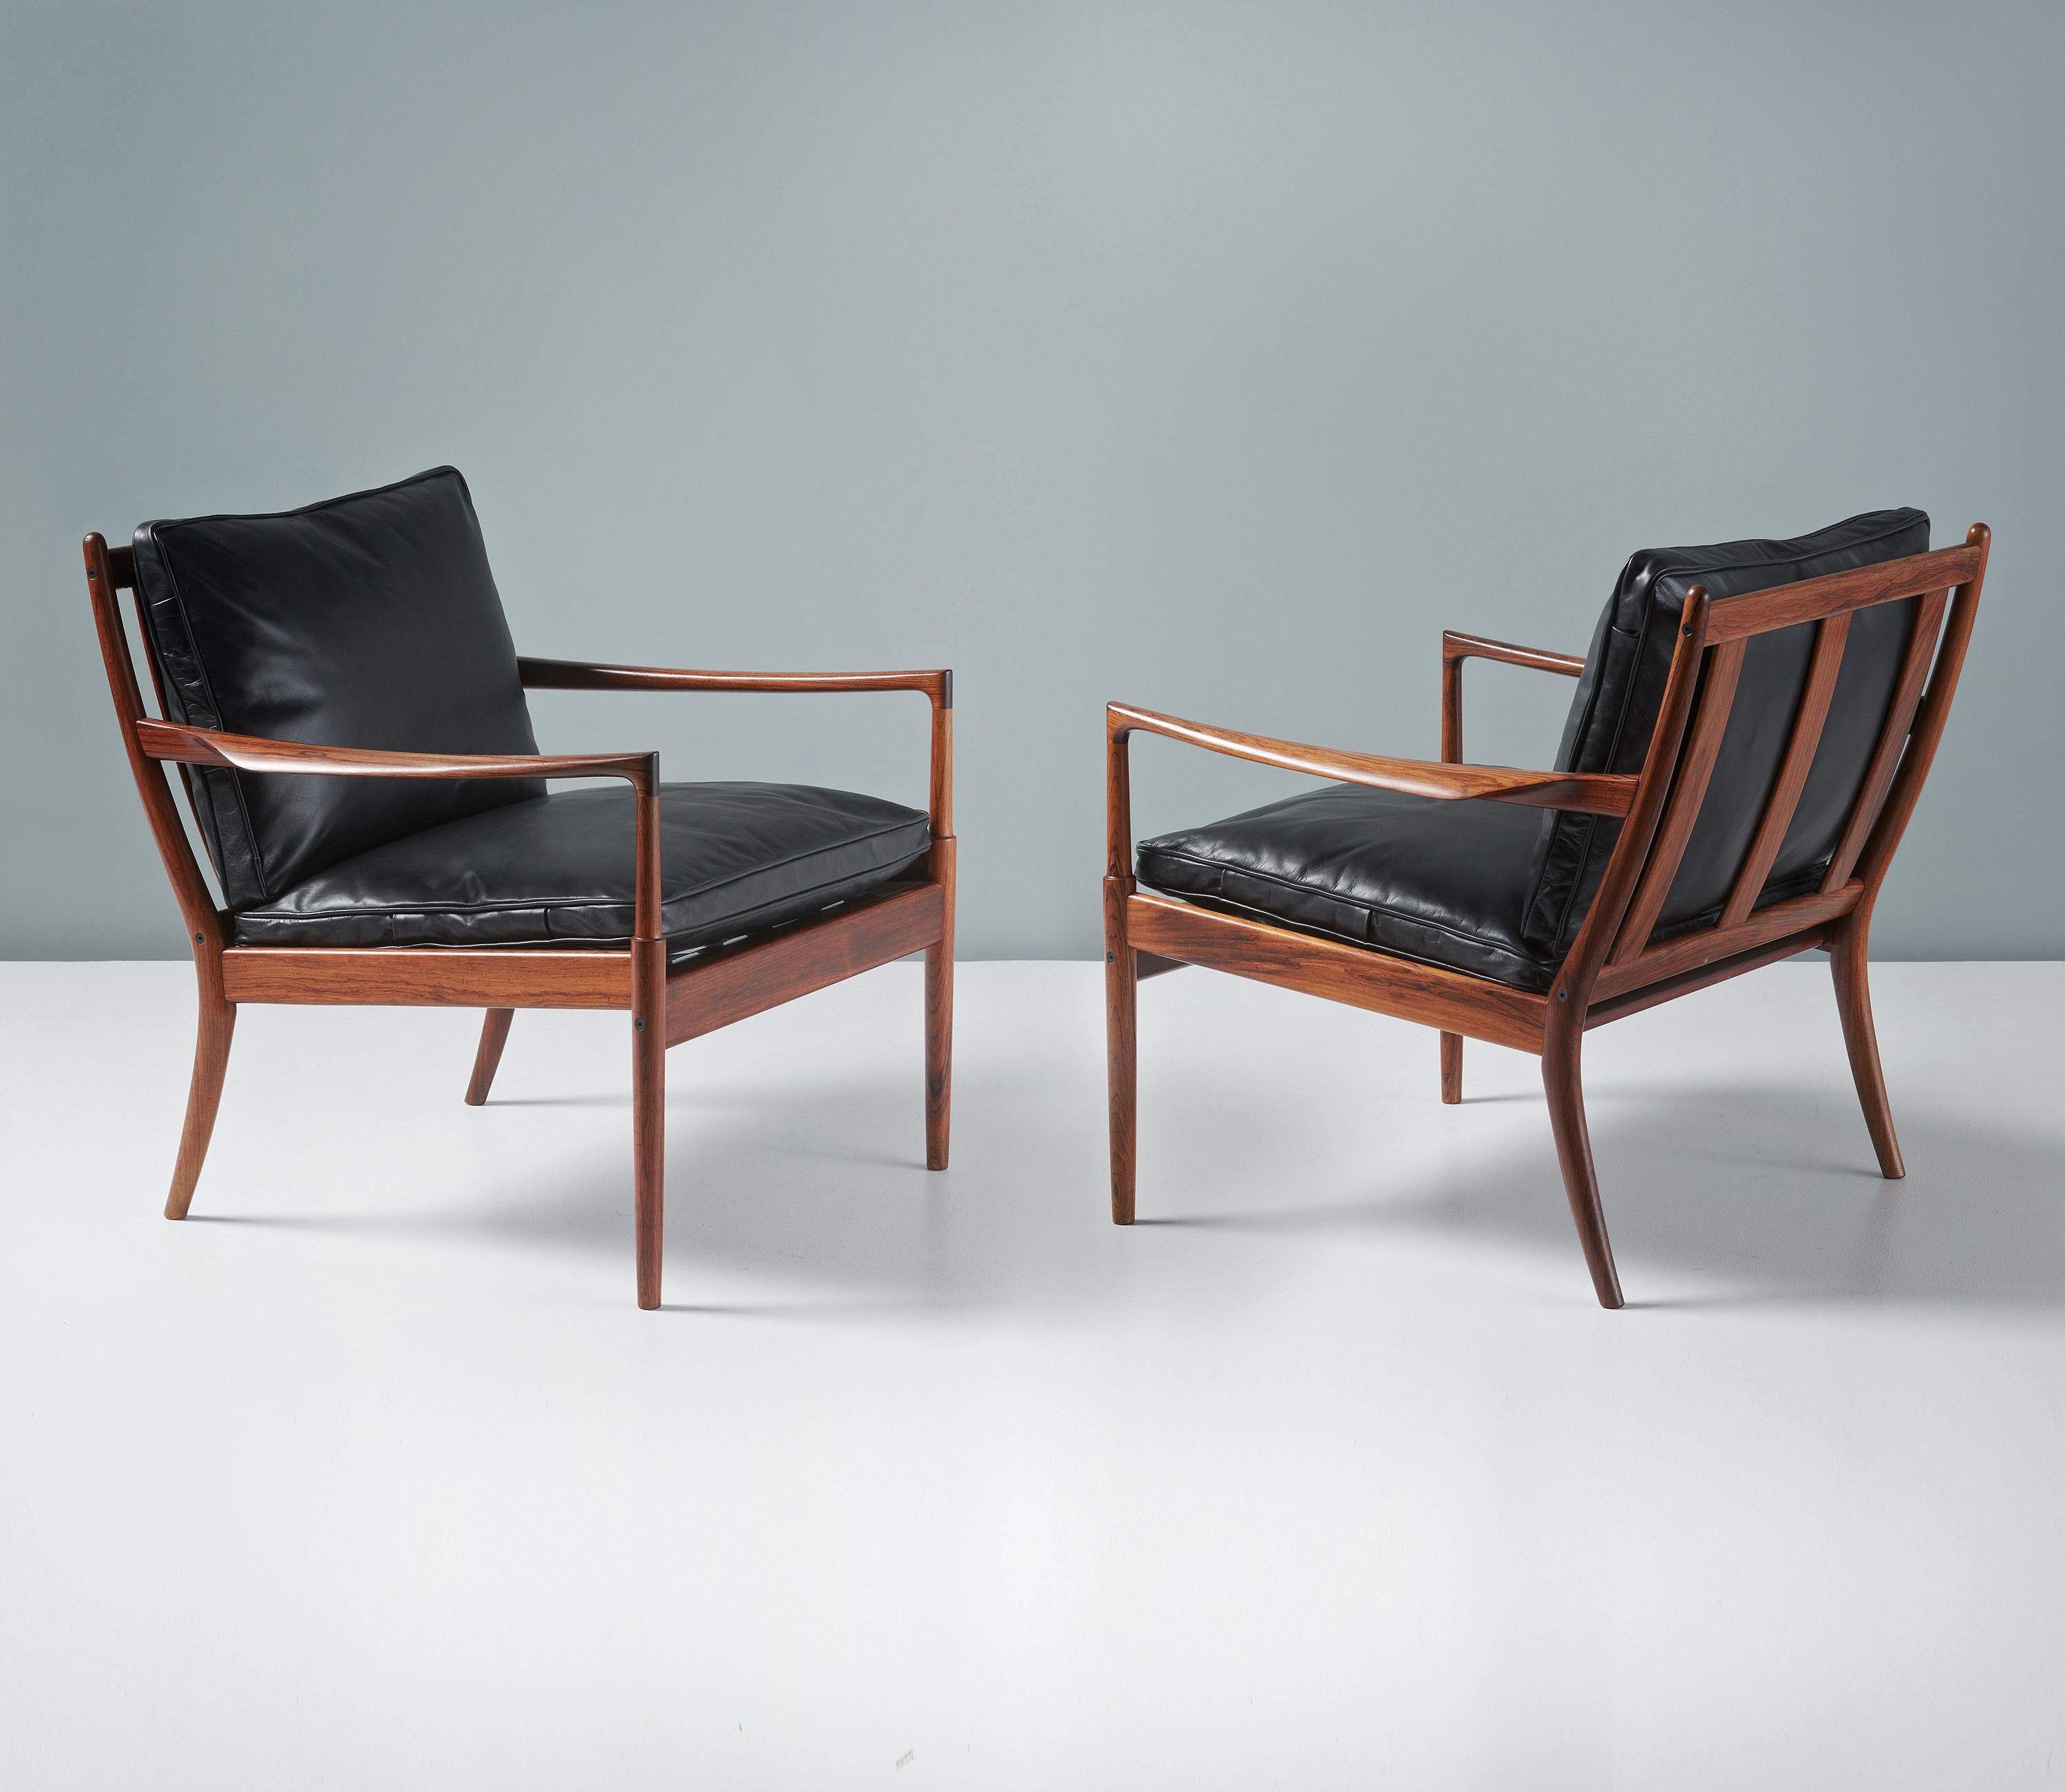 Ib Kofod-Larsen - Pair of Samso Lounge Chairs, circa 1958.

Rarely seen lounge chairs produced by Olof Perssons Fatoljindustri (OPE), Jonkoping, Sweden. These examples are made from highly figured exotic rosewood and come with new feather cushions